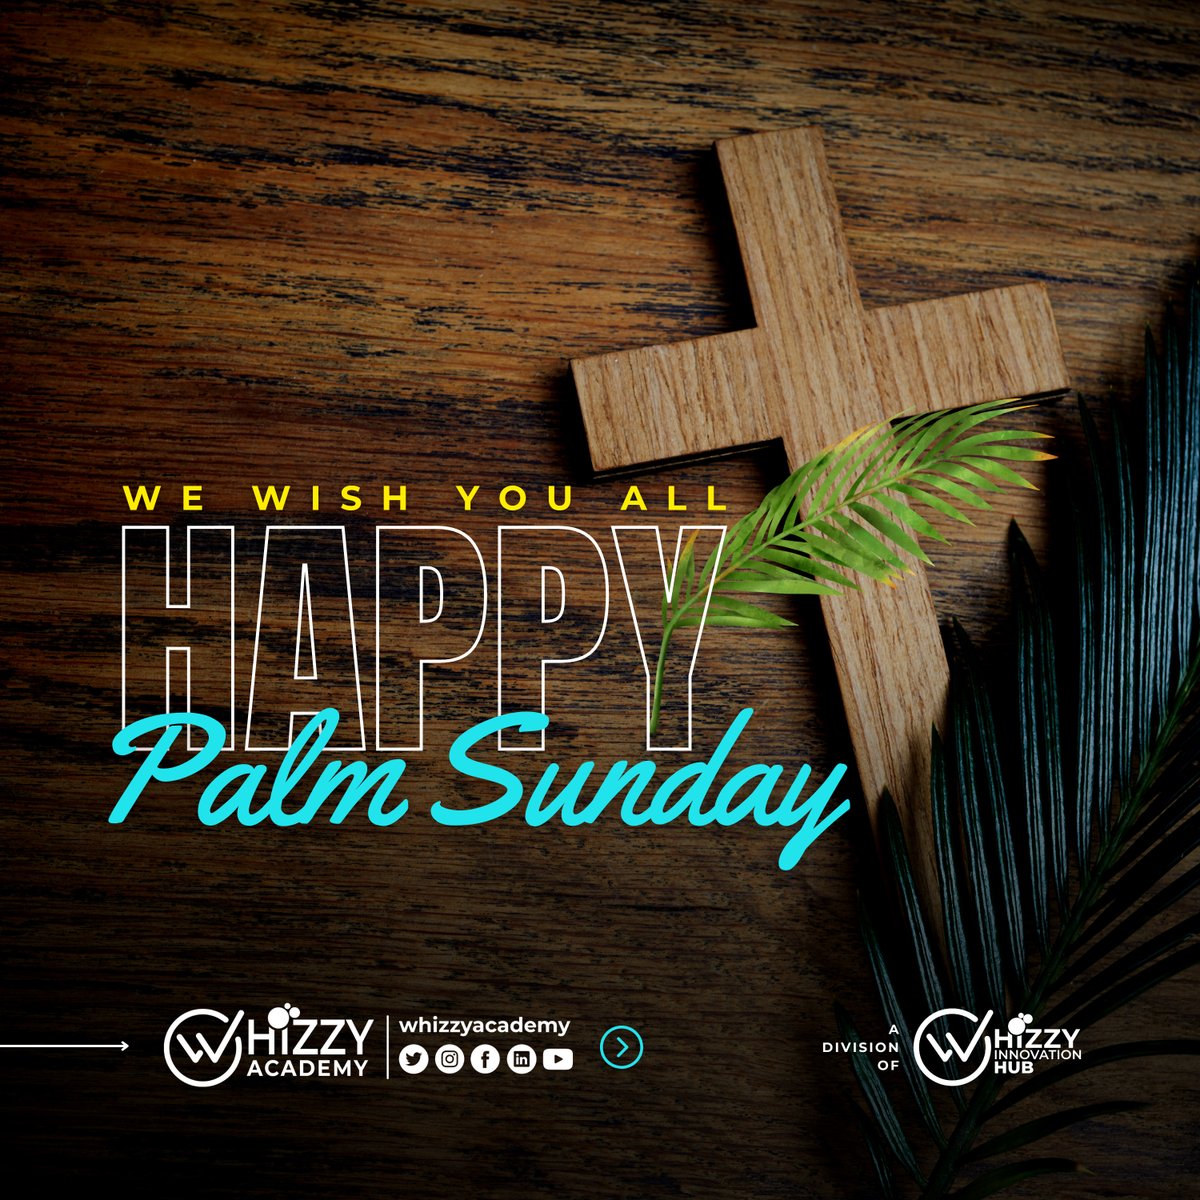 For Christians, it is a reminder of the welcoming of Jesus into our hearts and of our willingness to follow him.

What is your perfect Palm Sunday like?

Share with us in the comment section!

#palmsunday
#whizzyacademy
#easteringhana
#PerfectPalmSunday